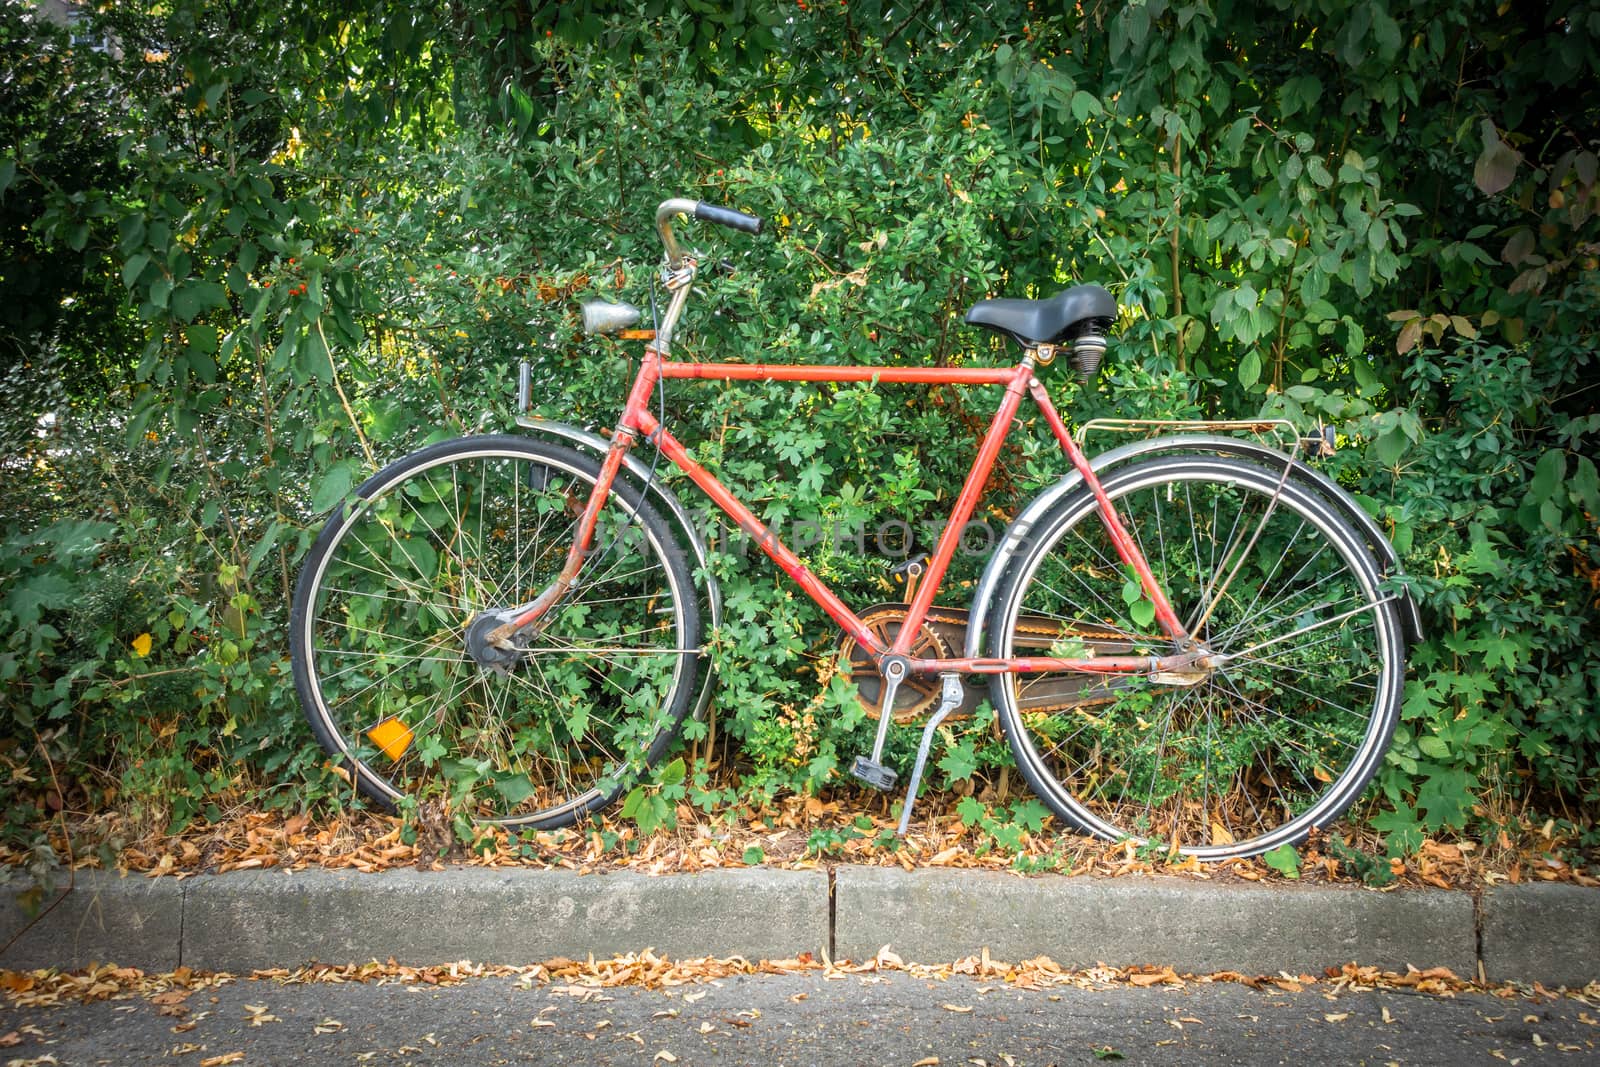 An image of an old bicycle in a hedge